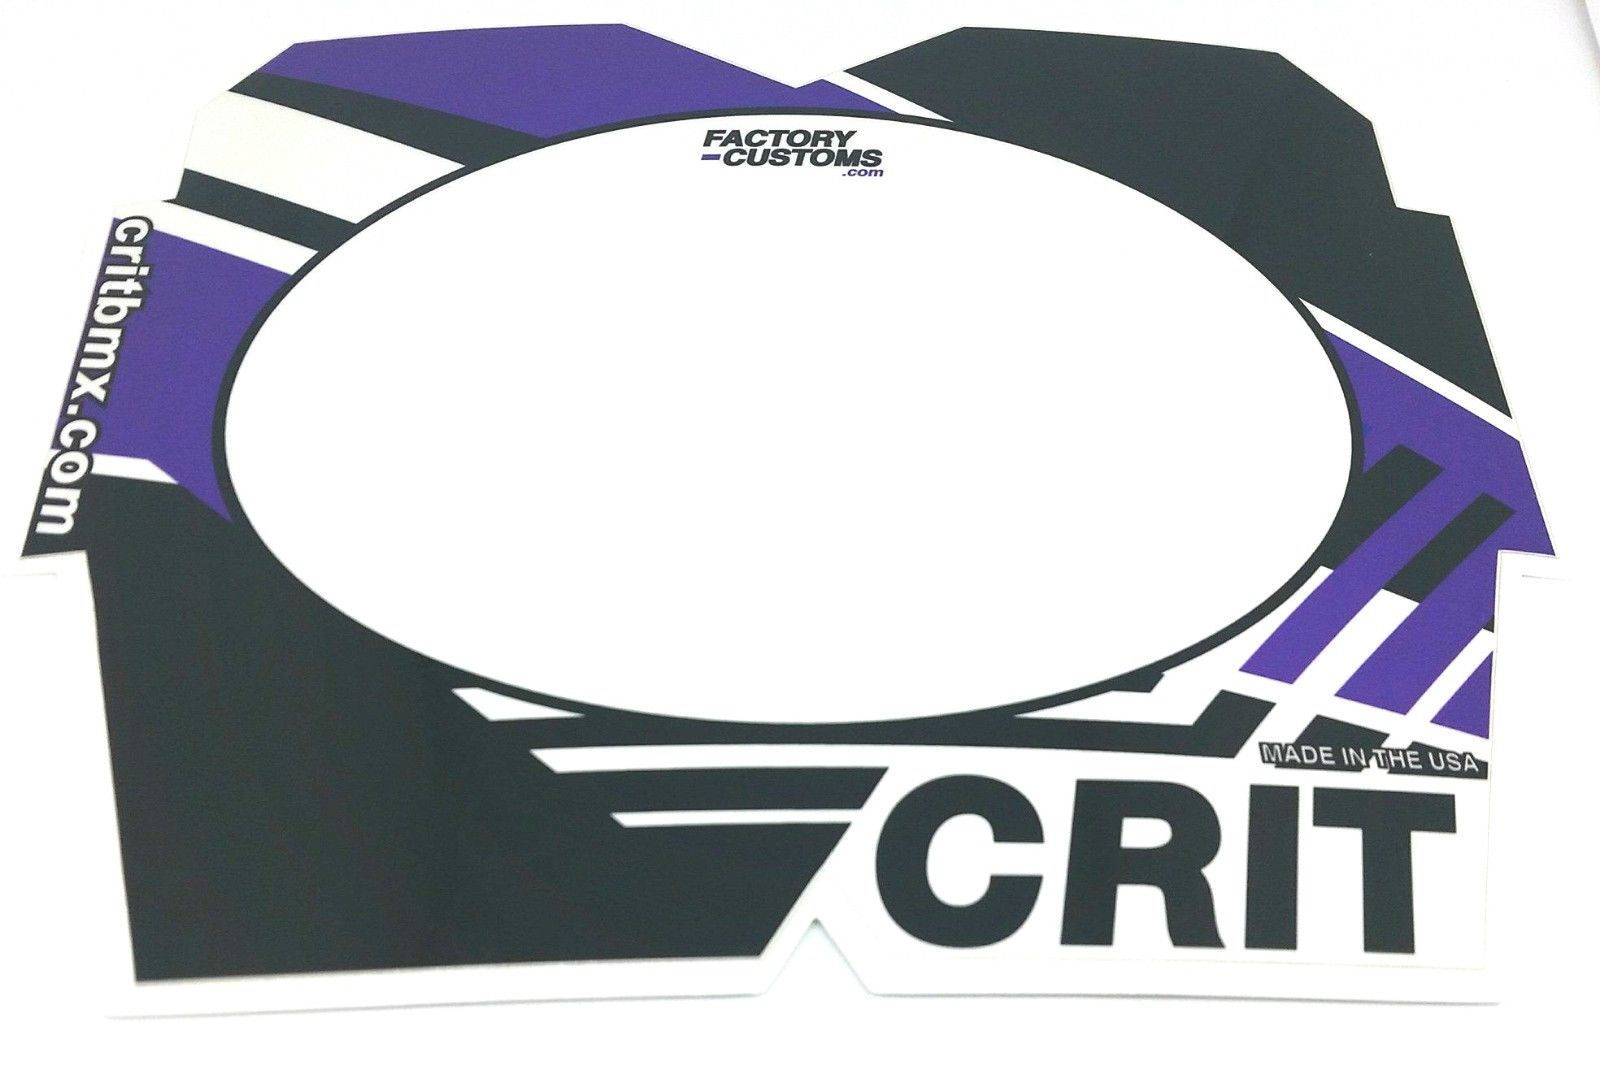 Crit BMX Pro Number Plate - Purple & White Color Block Graphics - USA Made